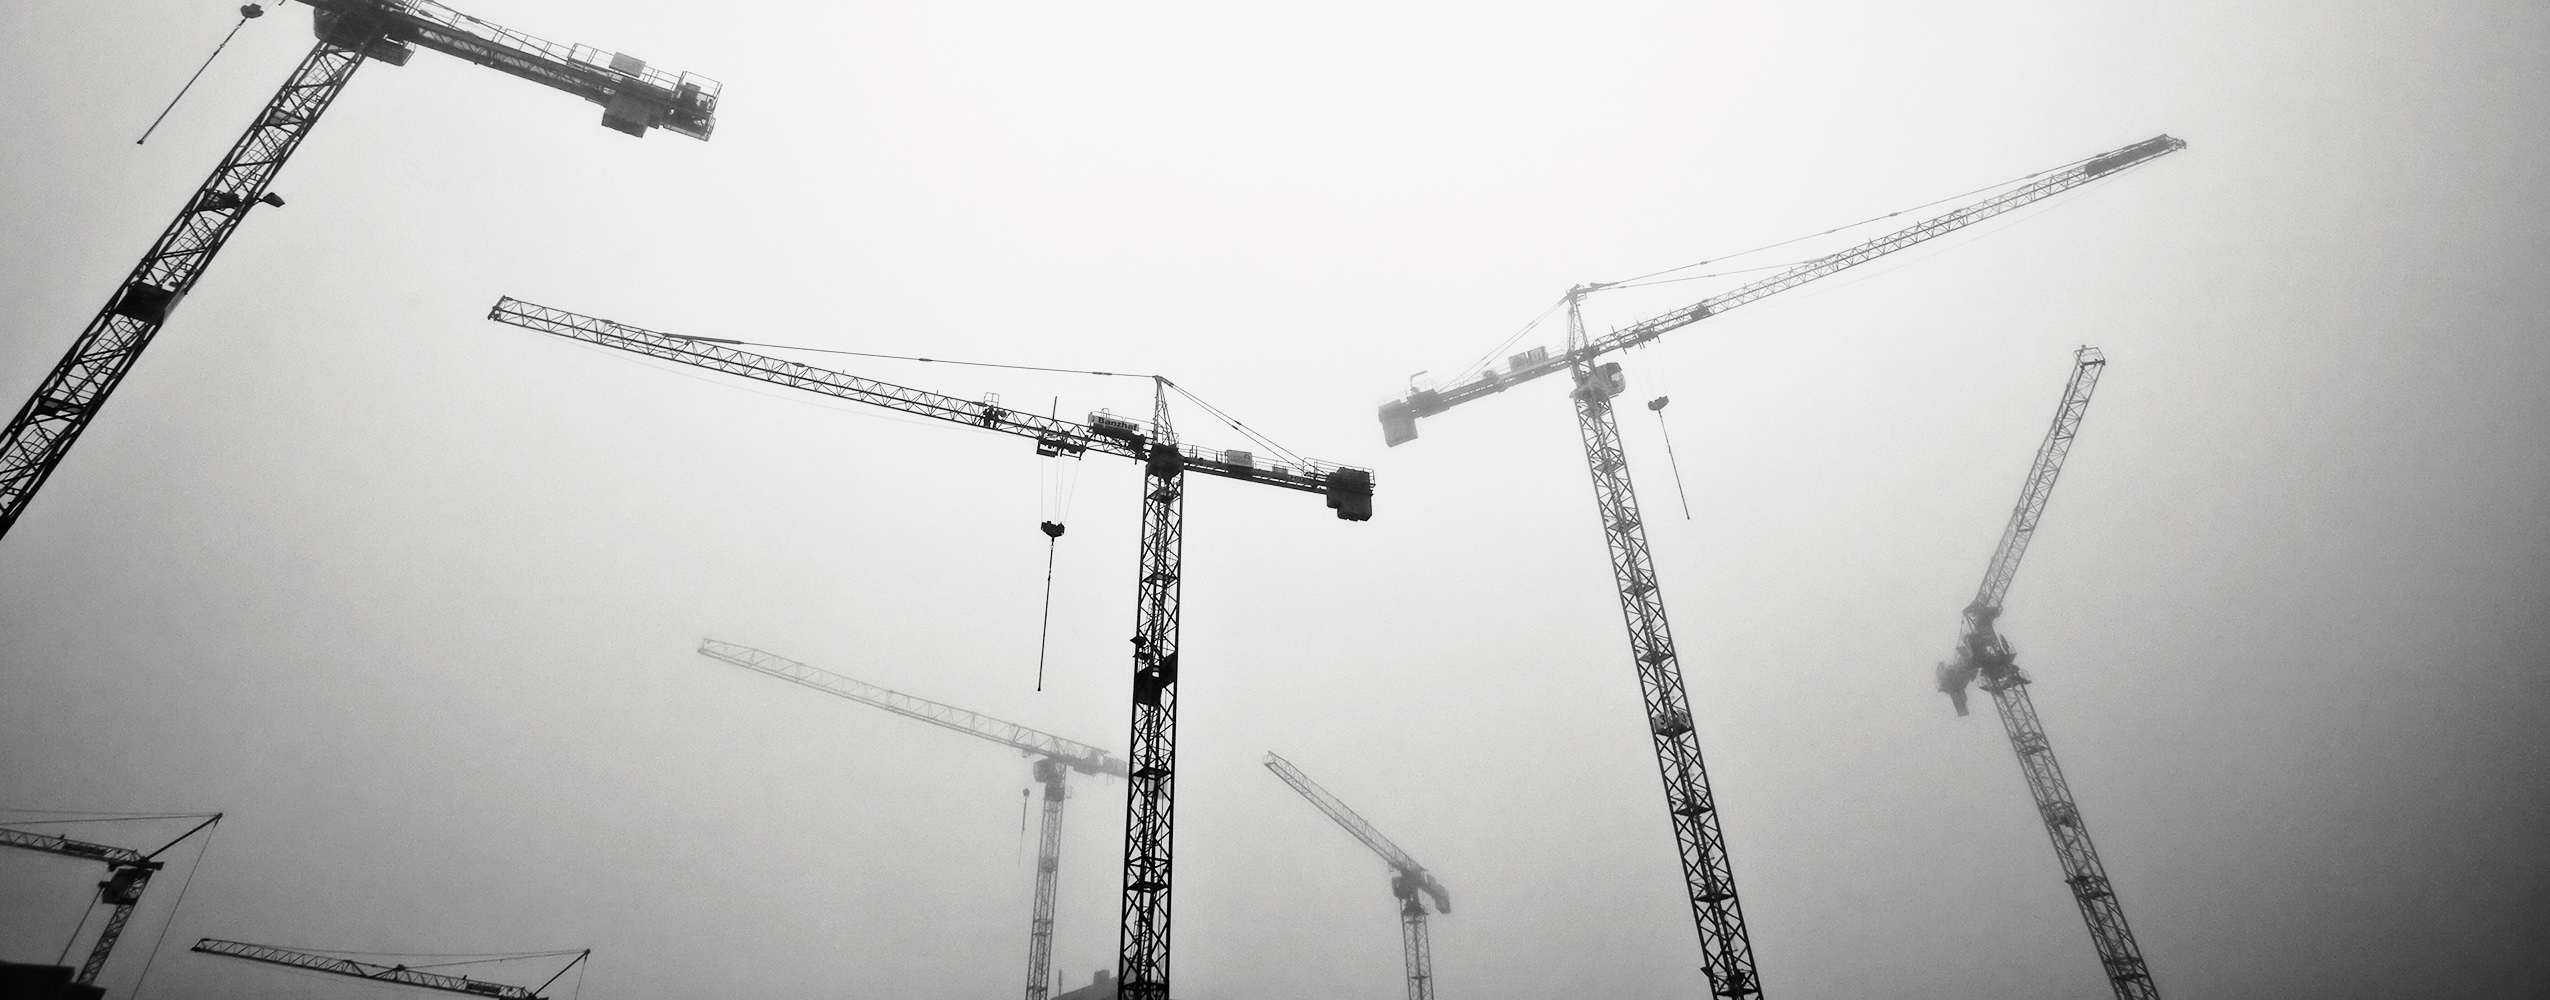 Construction by Andreas Levers